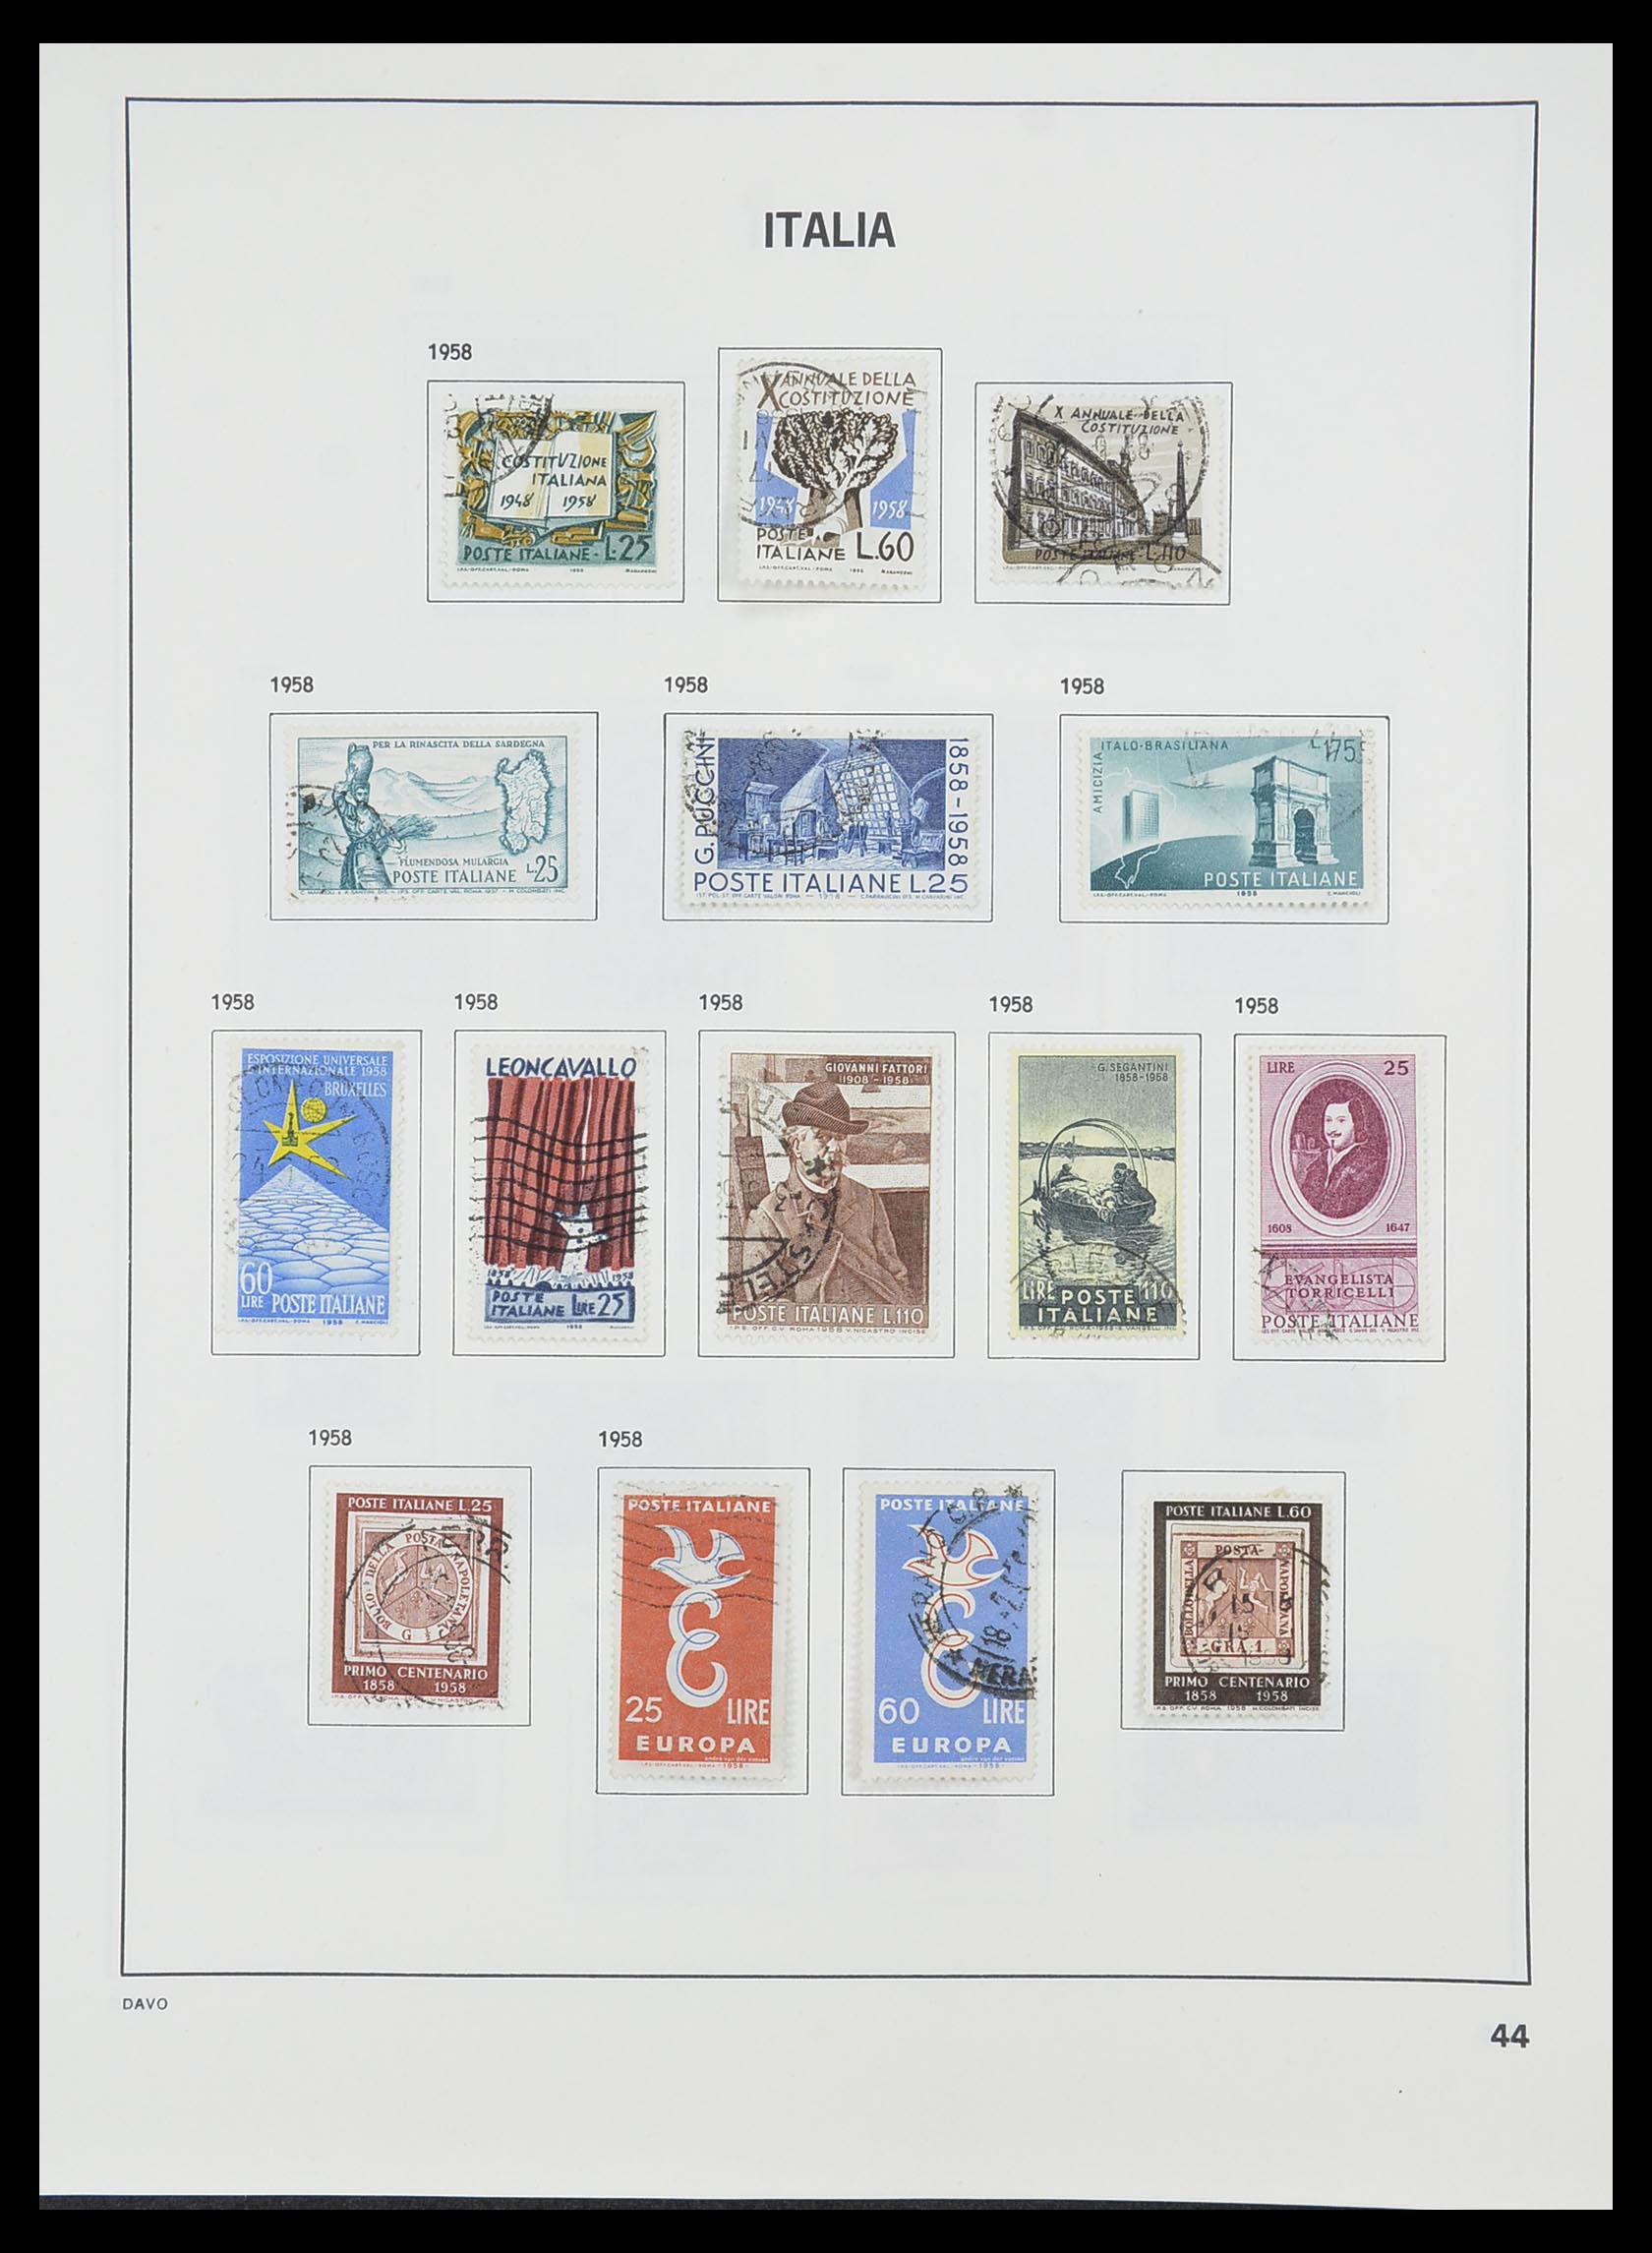 33413 019 - Stamp collection 33413 Italy 1945-2000.